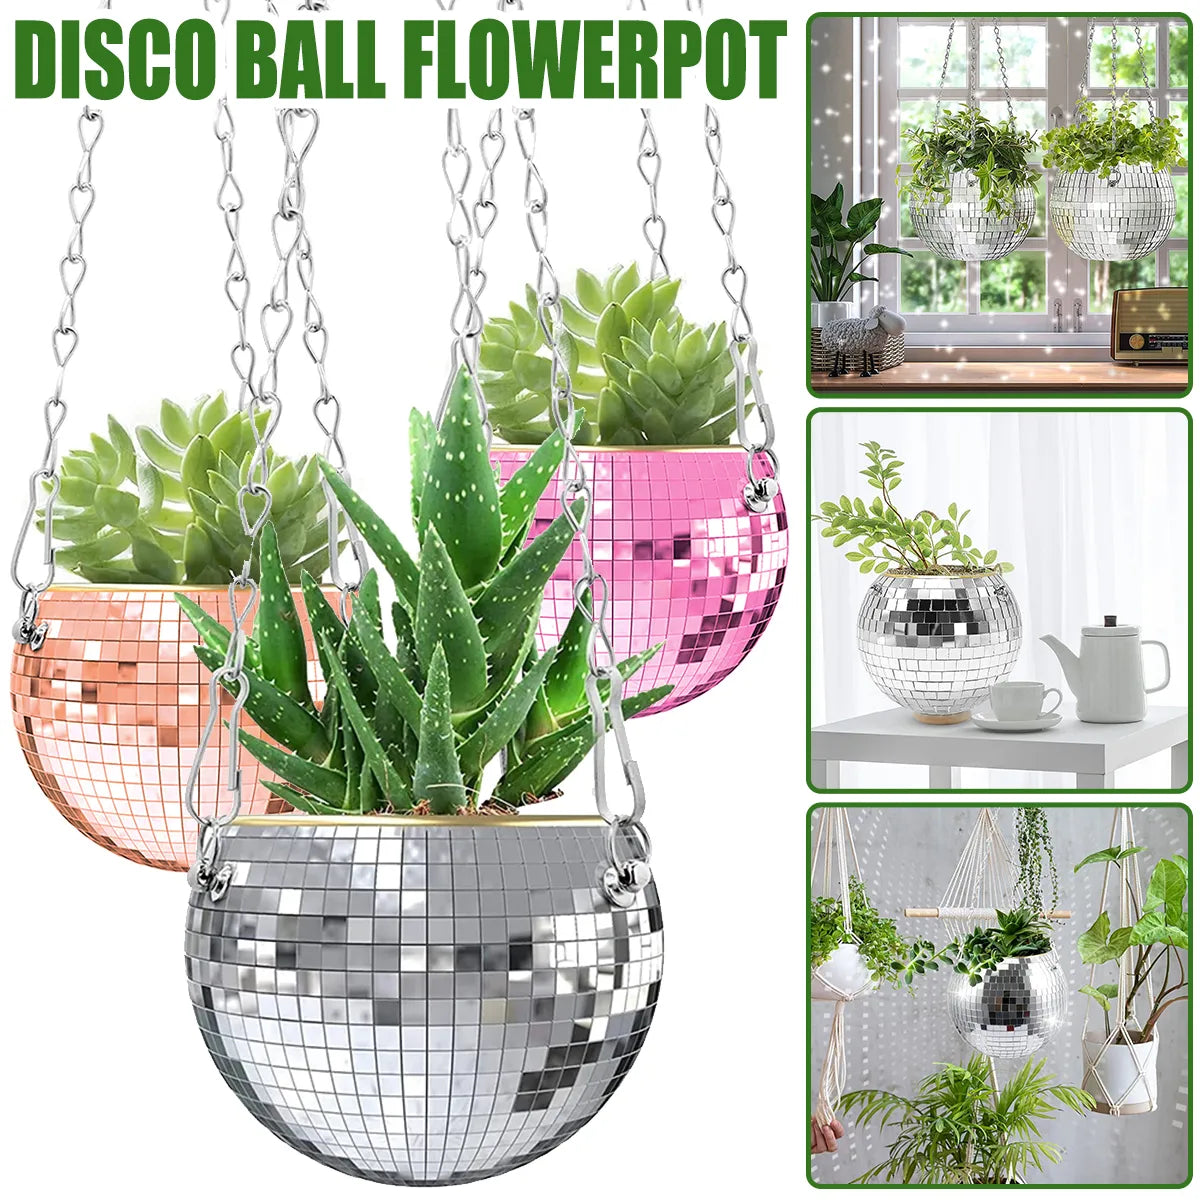 10/20cm Disco Ball Hanging Flower Pot - Your Homes Décor and More